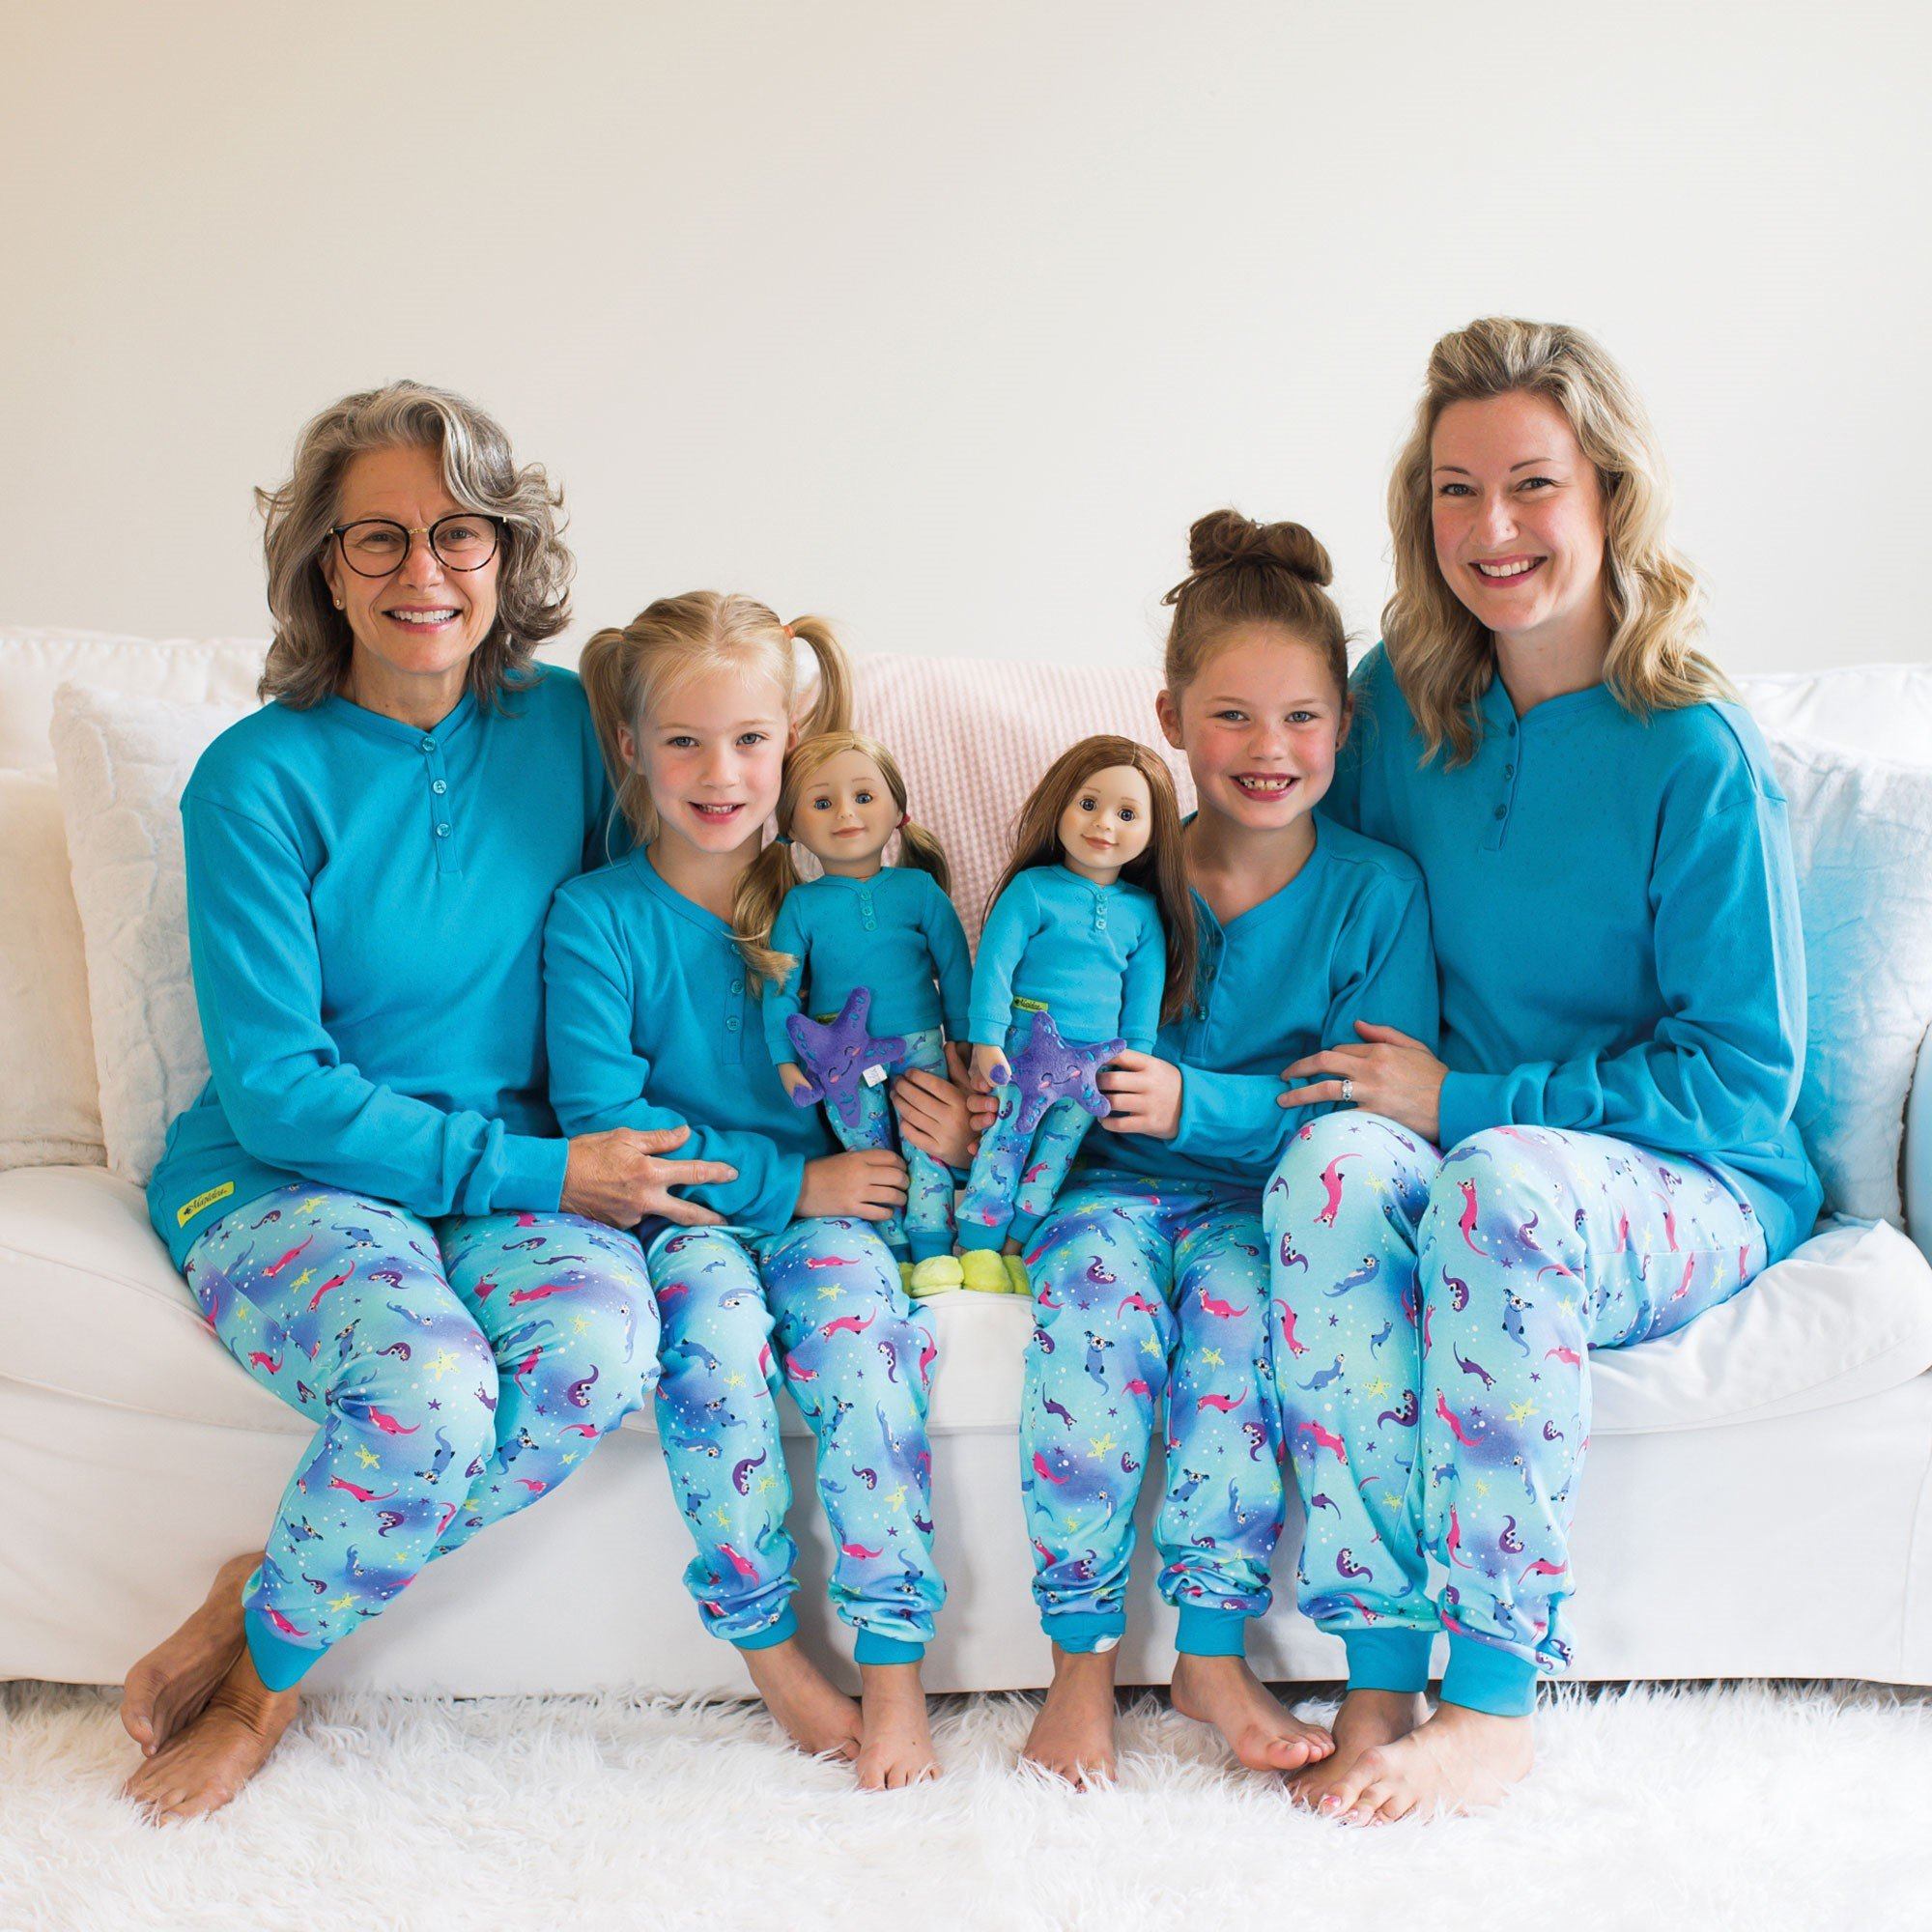 mom, grandma, and girls with their dolls all wearing matching PJs